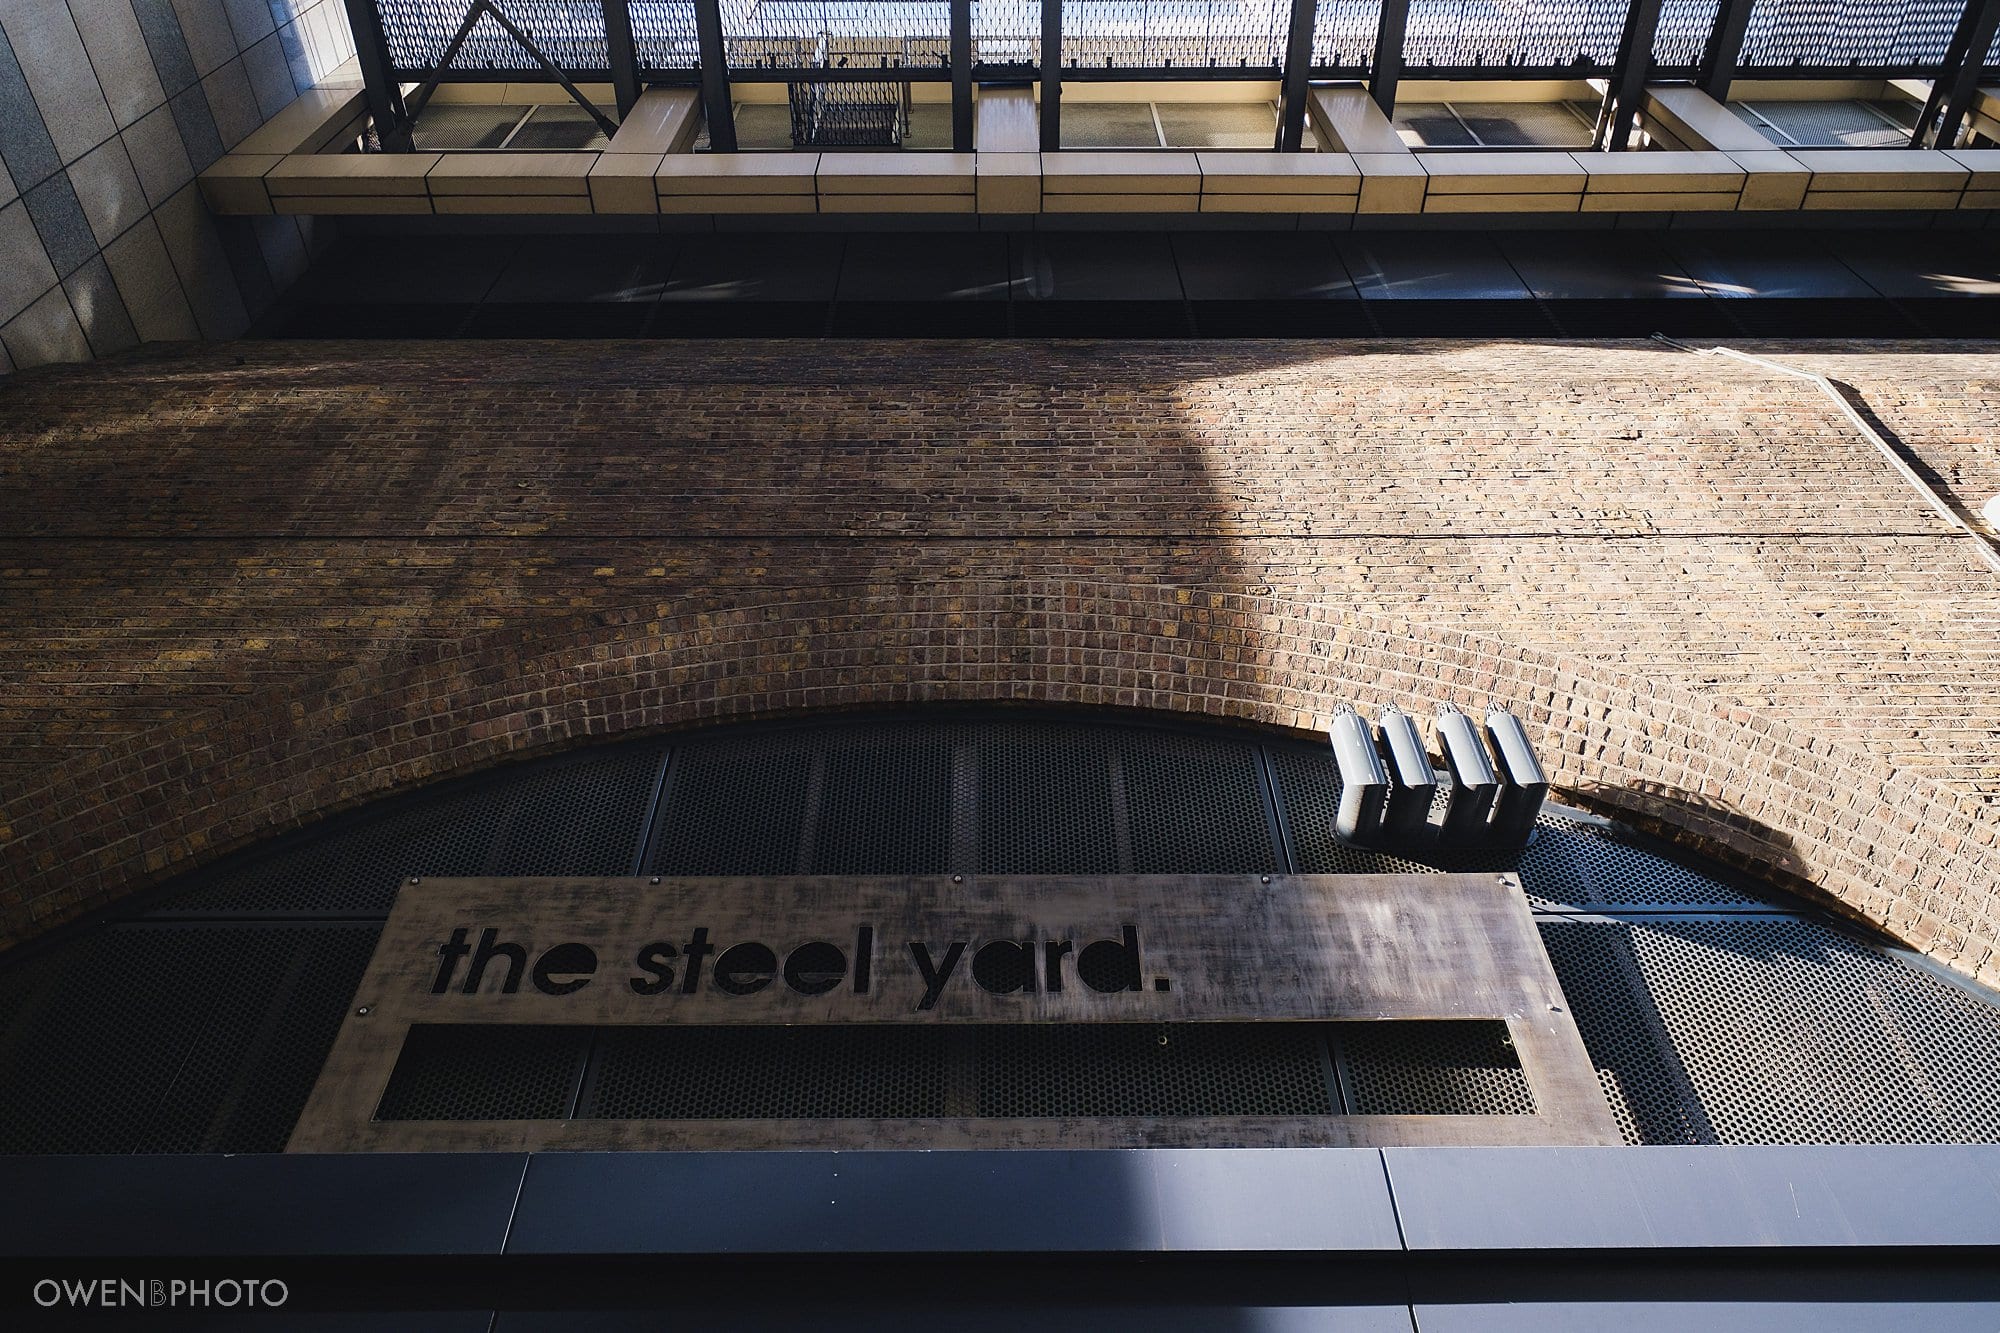 steelyard conference event photographer london 001 - A Conference at The Steel Yard